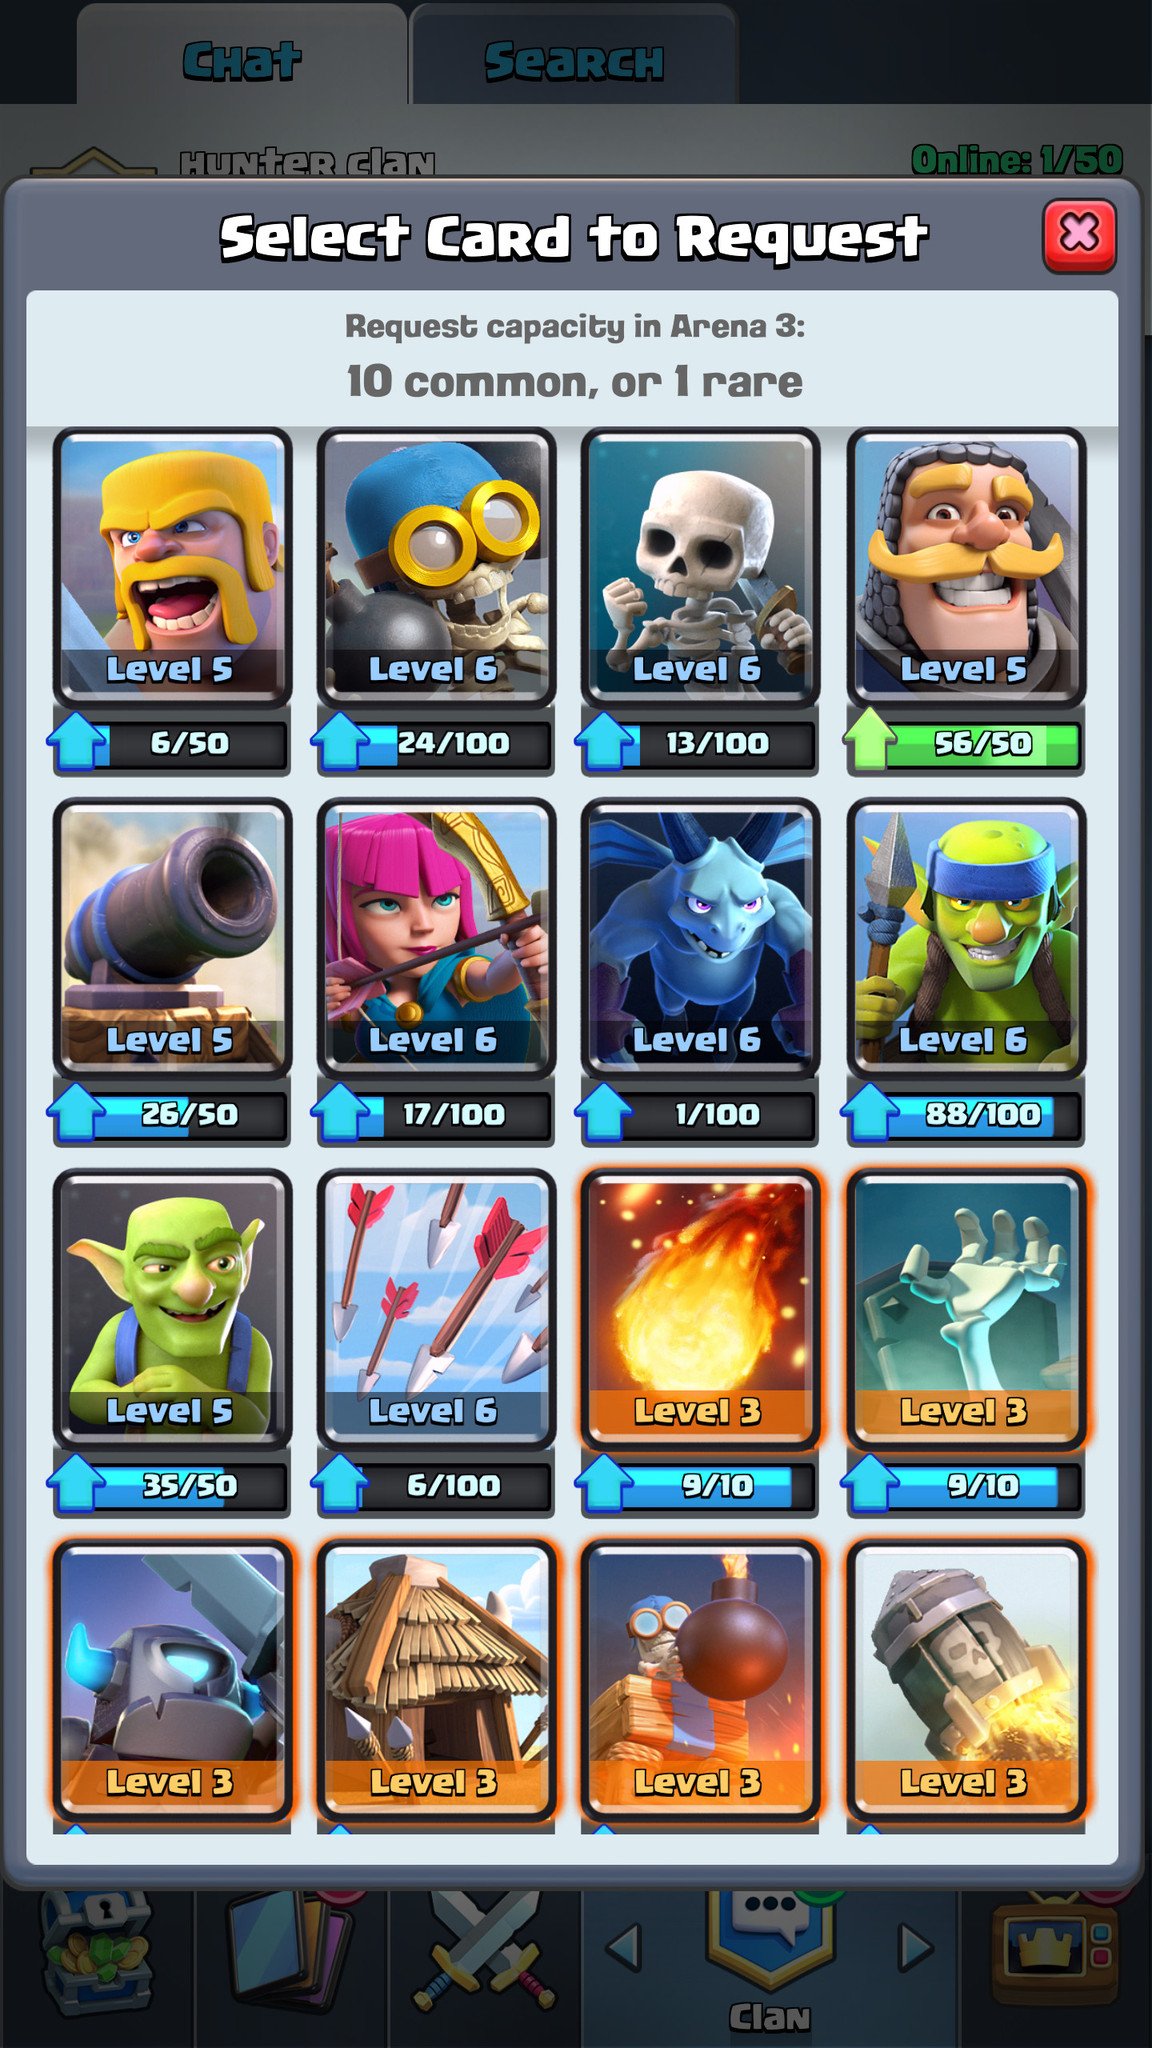 Request cards from your Clanmates.